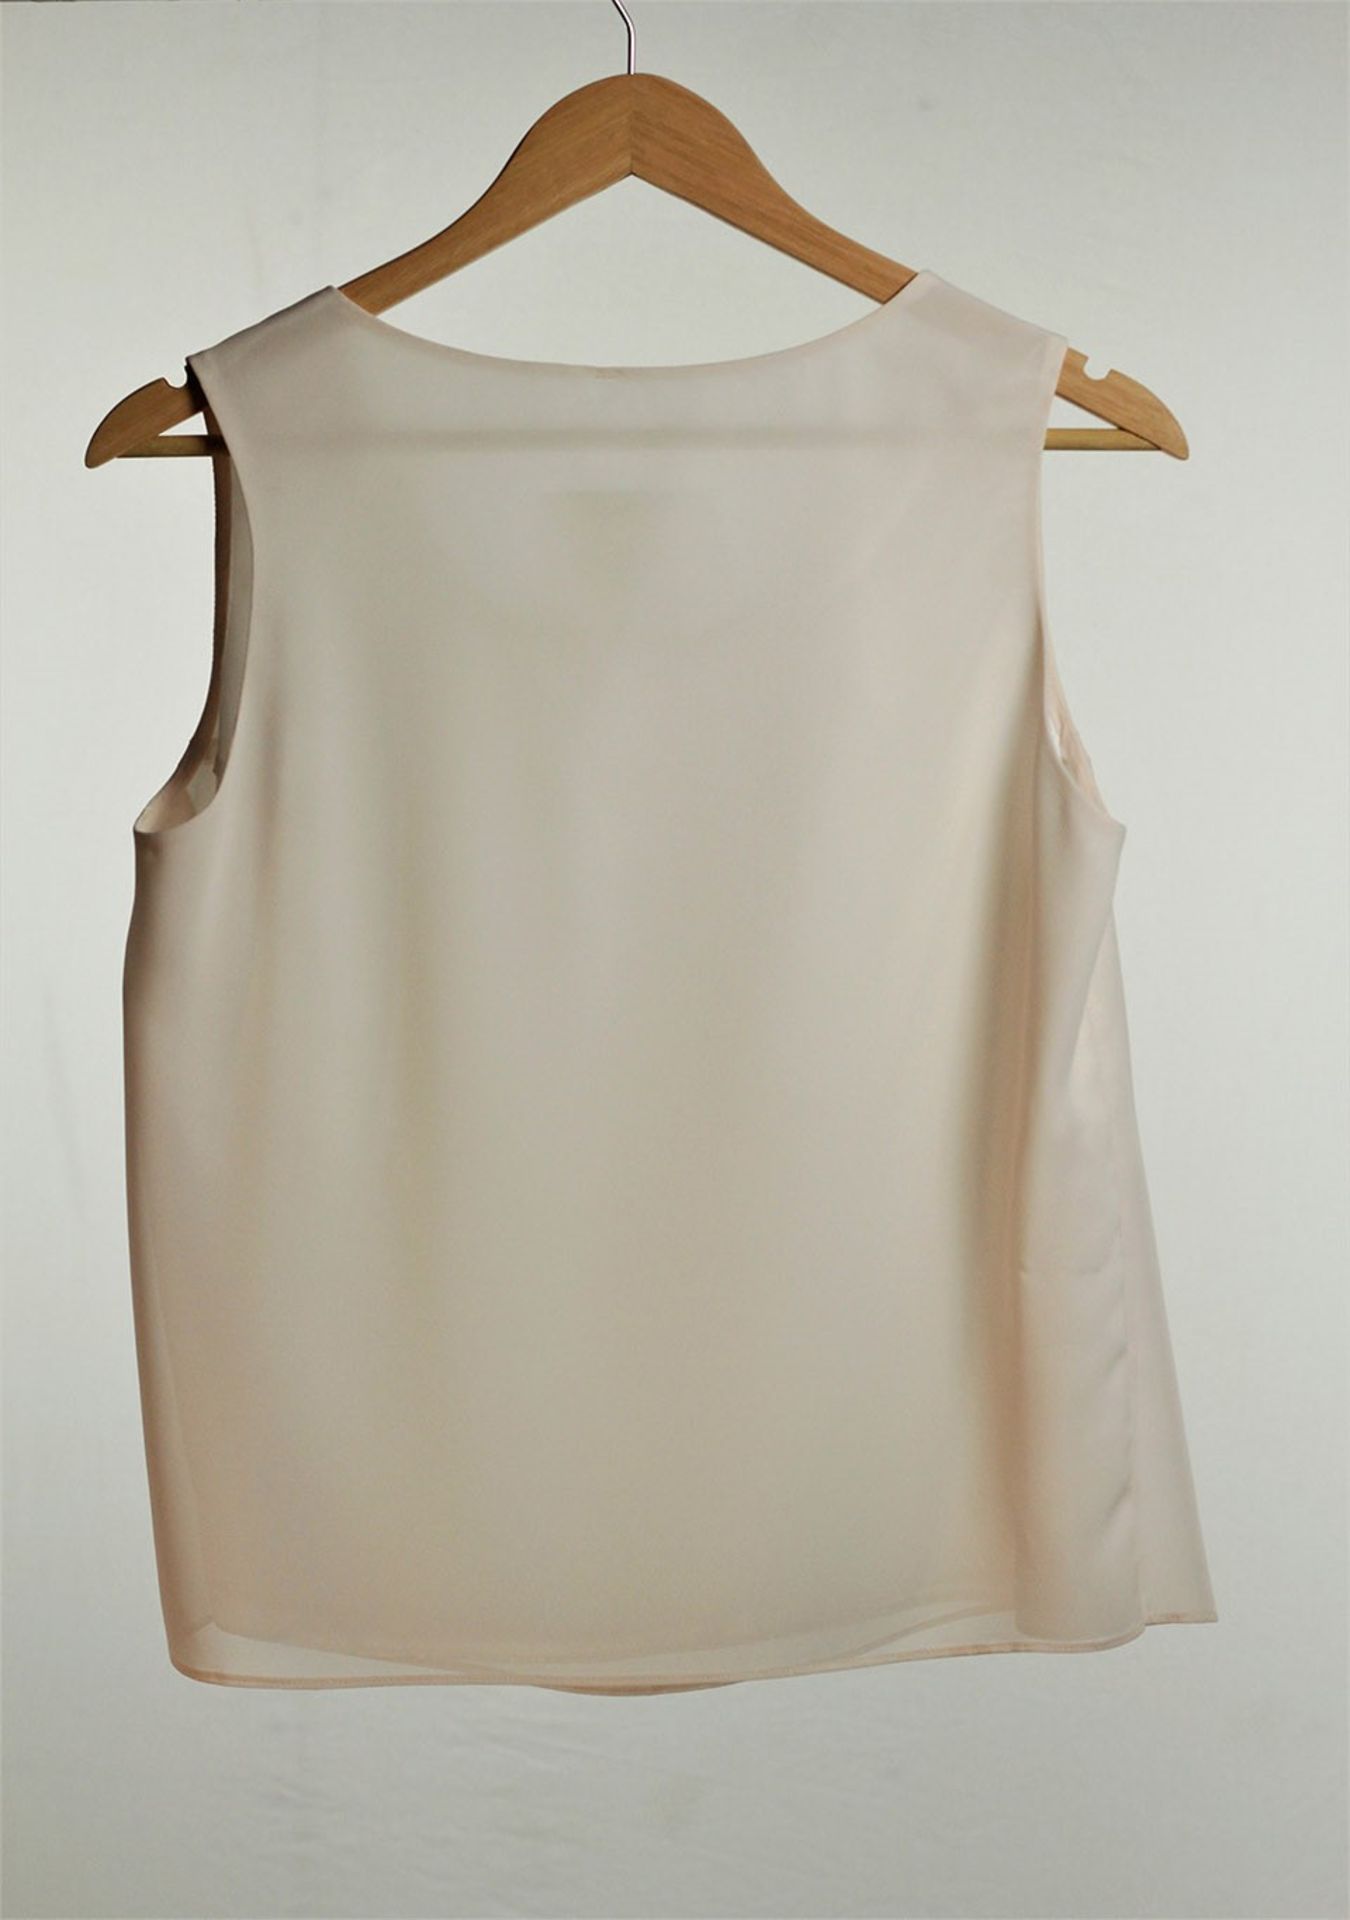 1 x Boutique Le Duc Pearl Pink Skirt - From a High End Clothing Boutique In The - Image 10 of 10